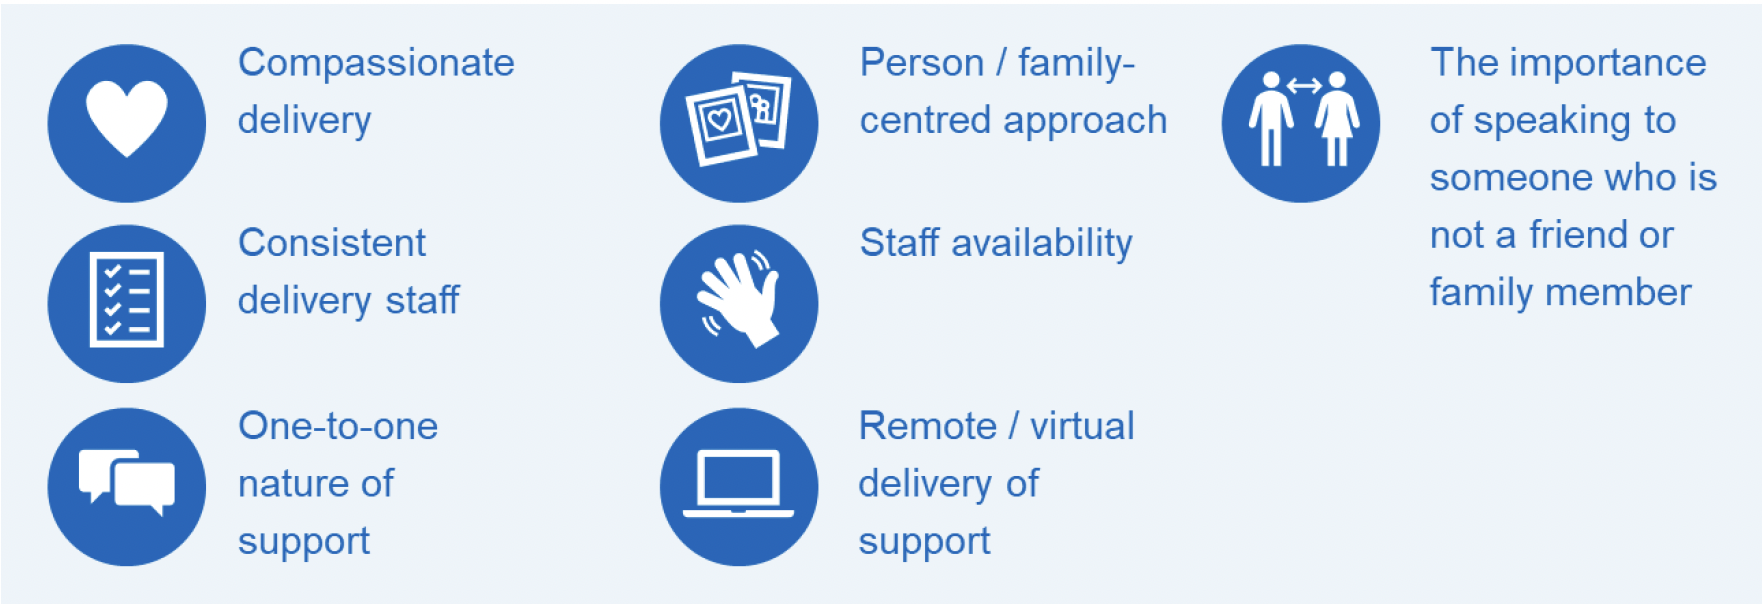 Infographic listing the key aspects highlighted by service users. These are compassionate delivery, person/family-centred approach, the importance of speaking to someone who is not a friend or family member, consistent delivery staff, staff availability, one-to-one nature of support and remote/virtual delivery of support.